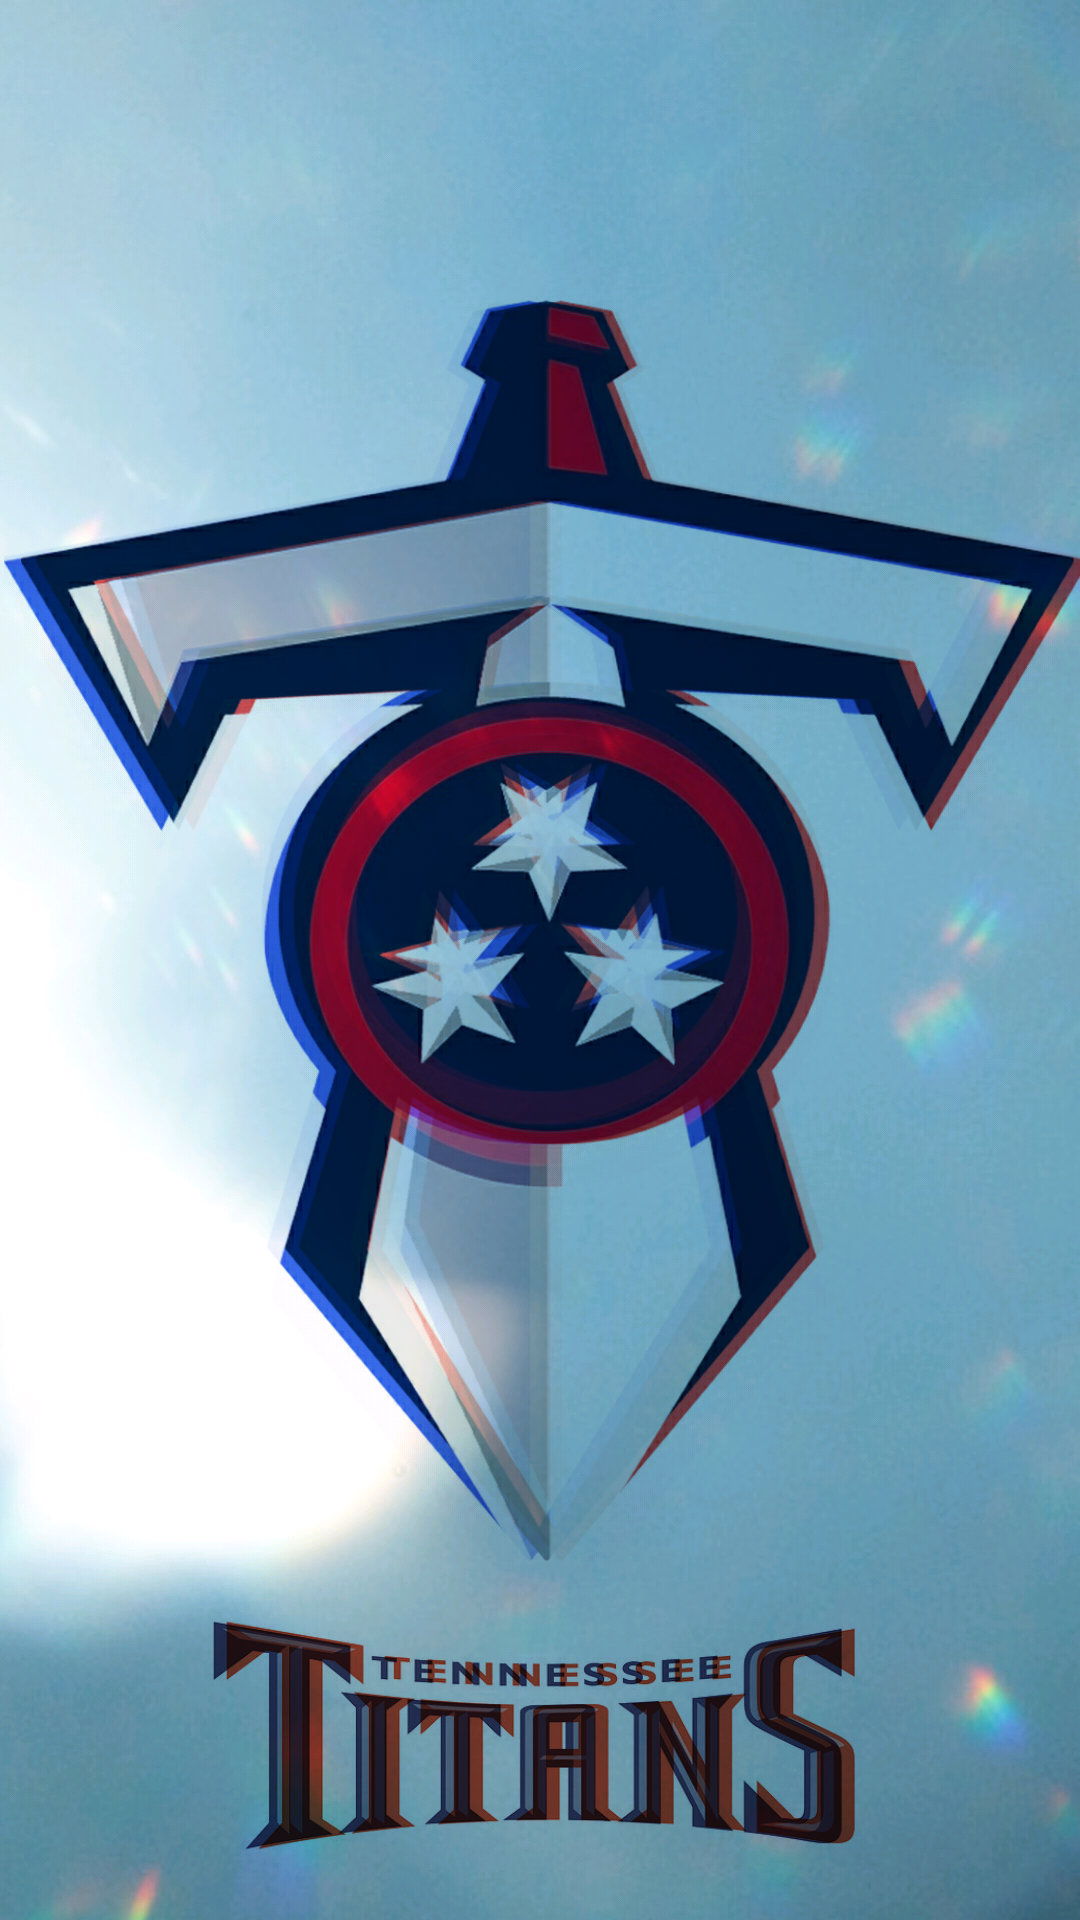 Tennessee Titans wallpaper background - Rarible